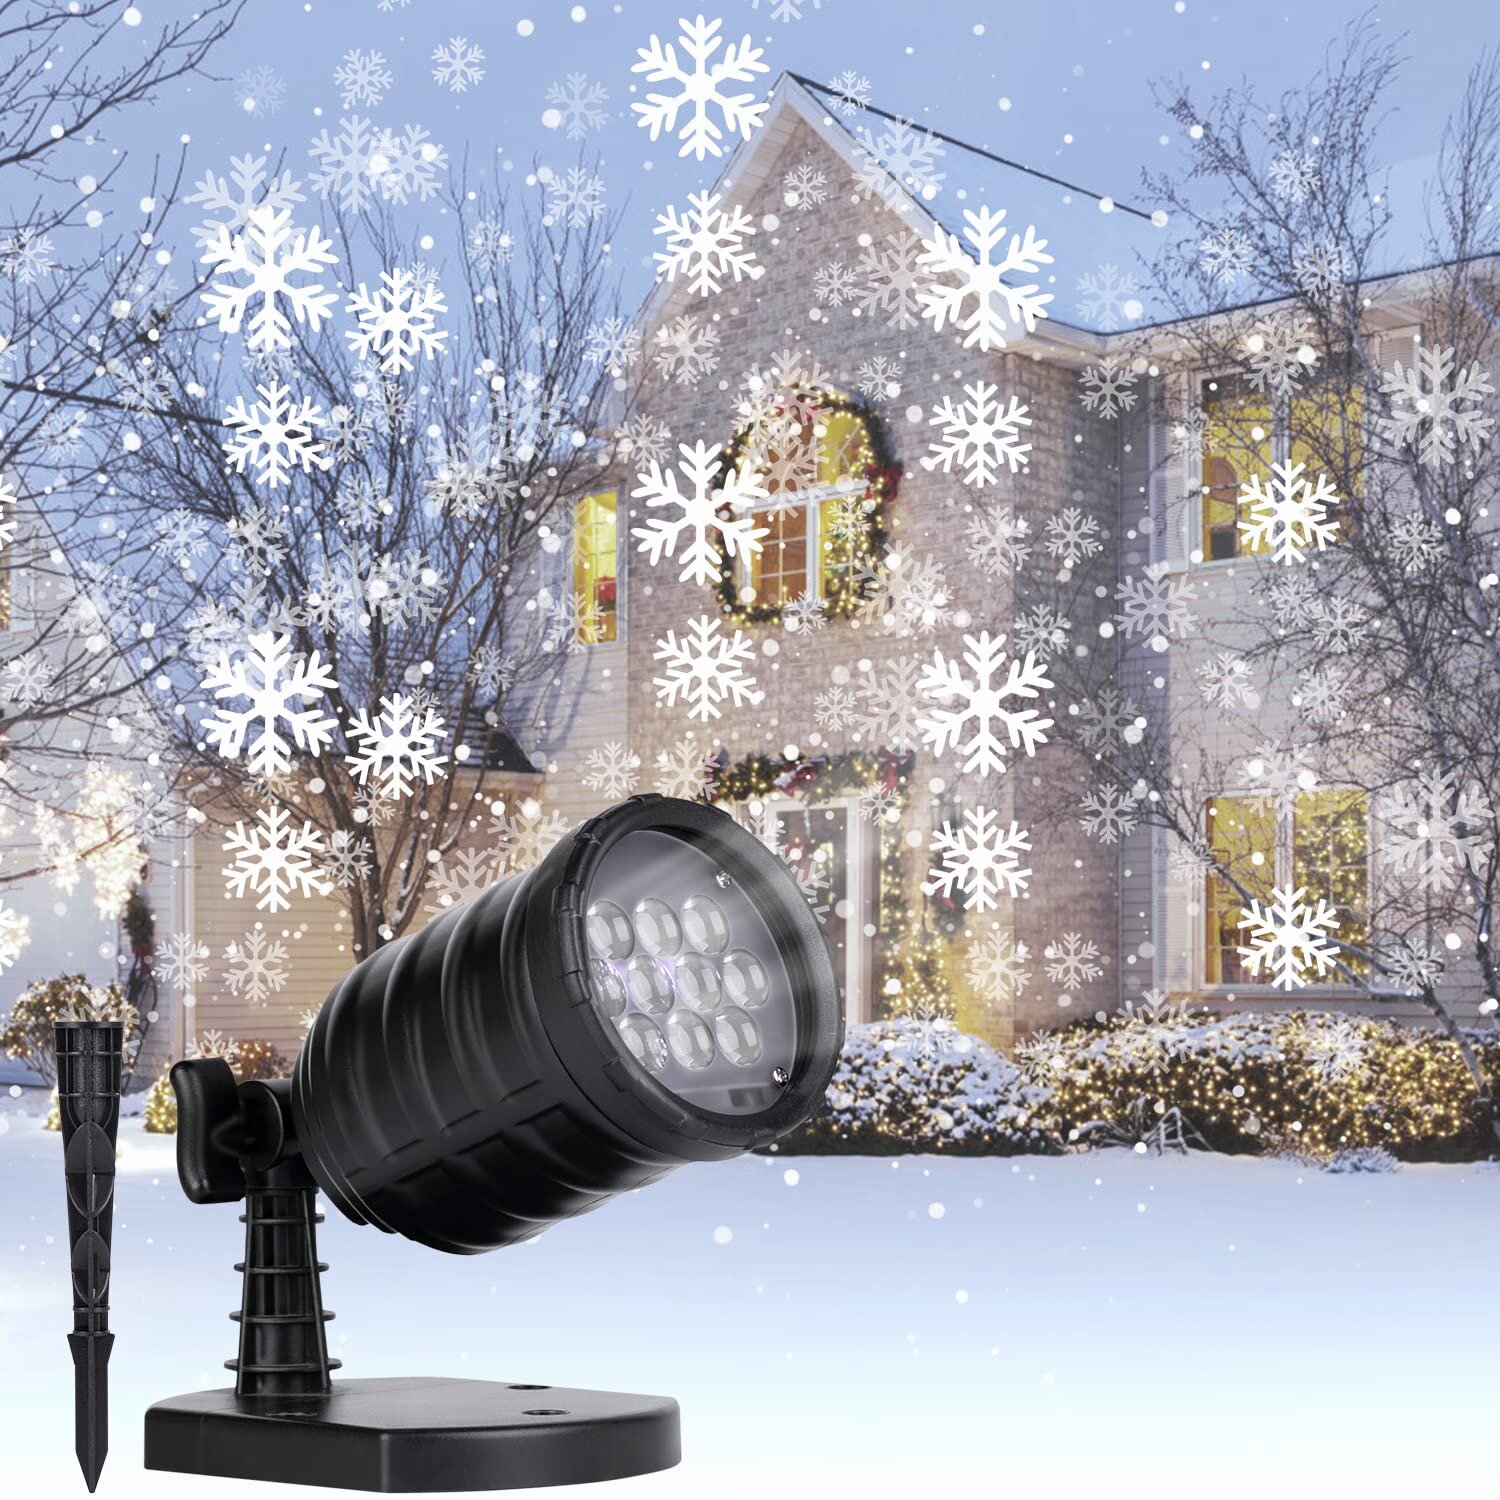 Waterproof Projection Light for Indoor & Outdoor Landscape Patio Garden Snowflake Snow Fall Projector Light for Christmas Party